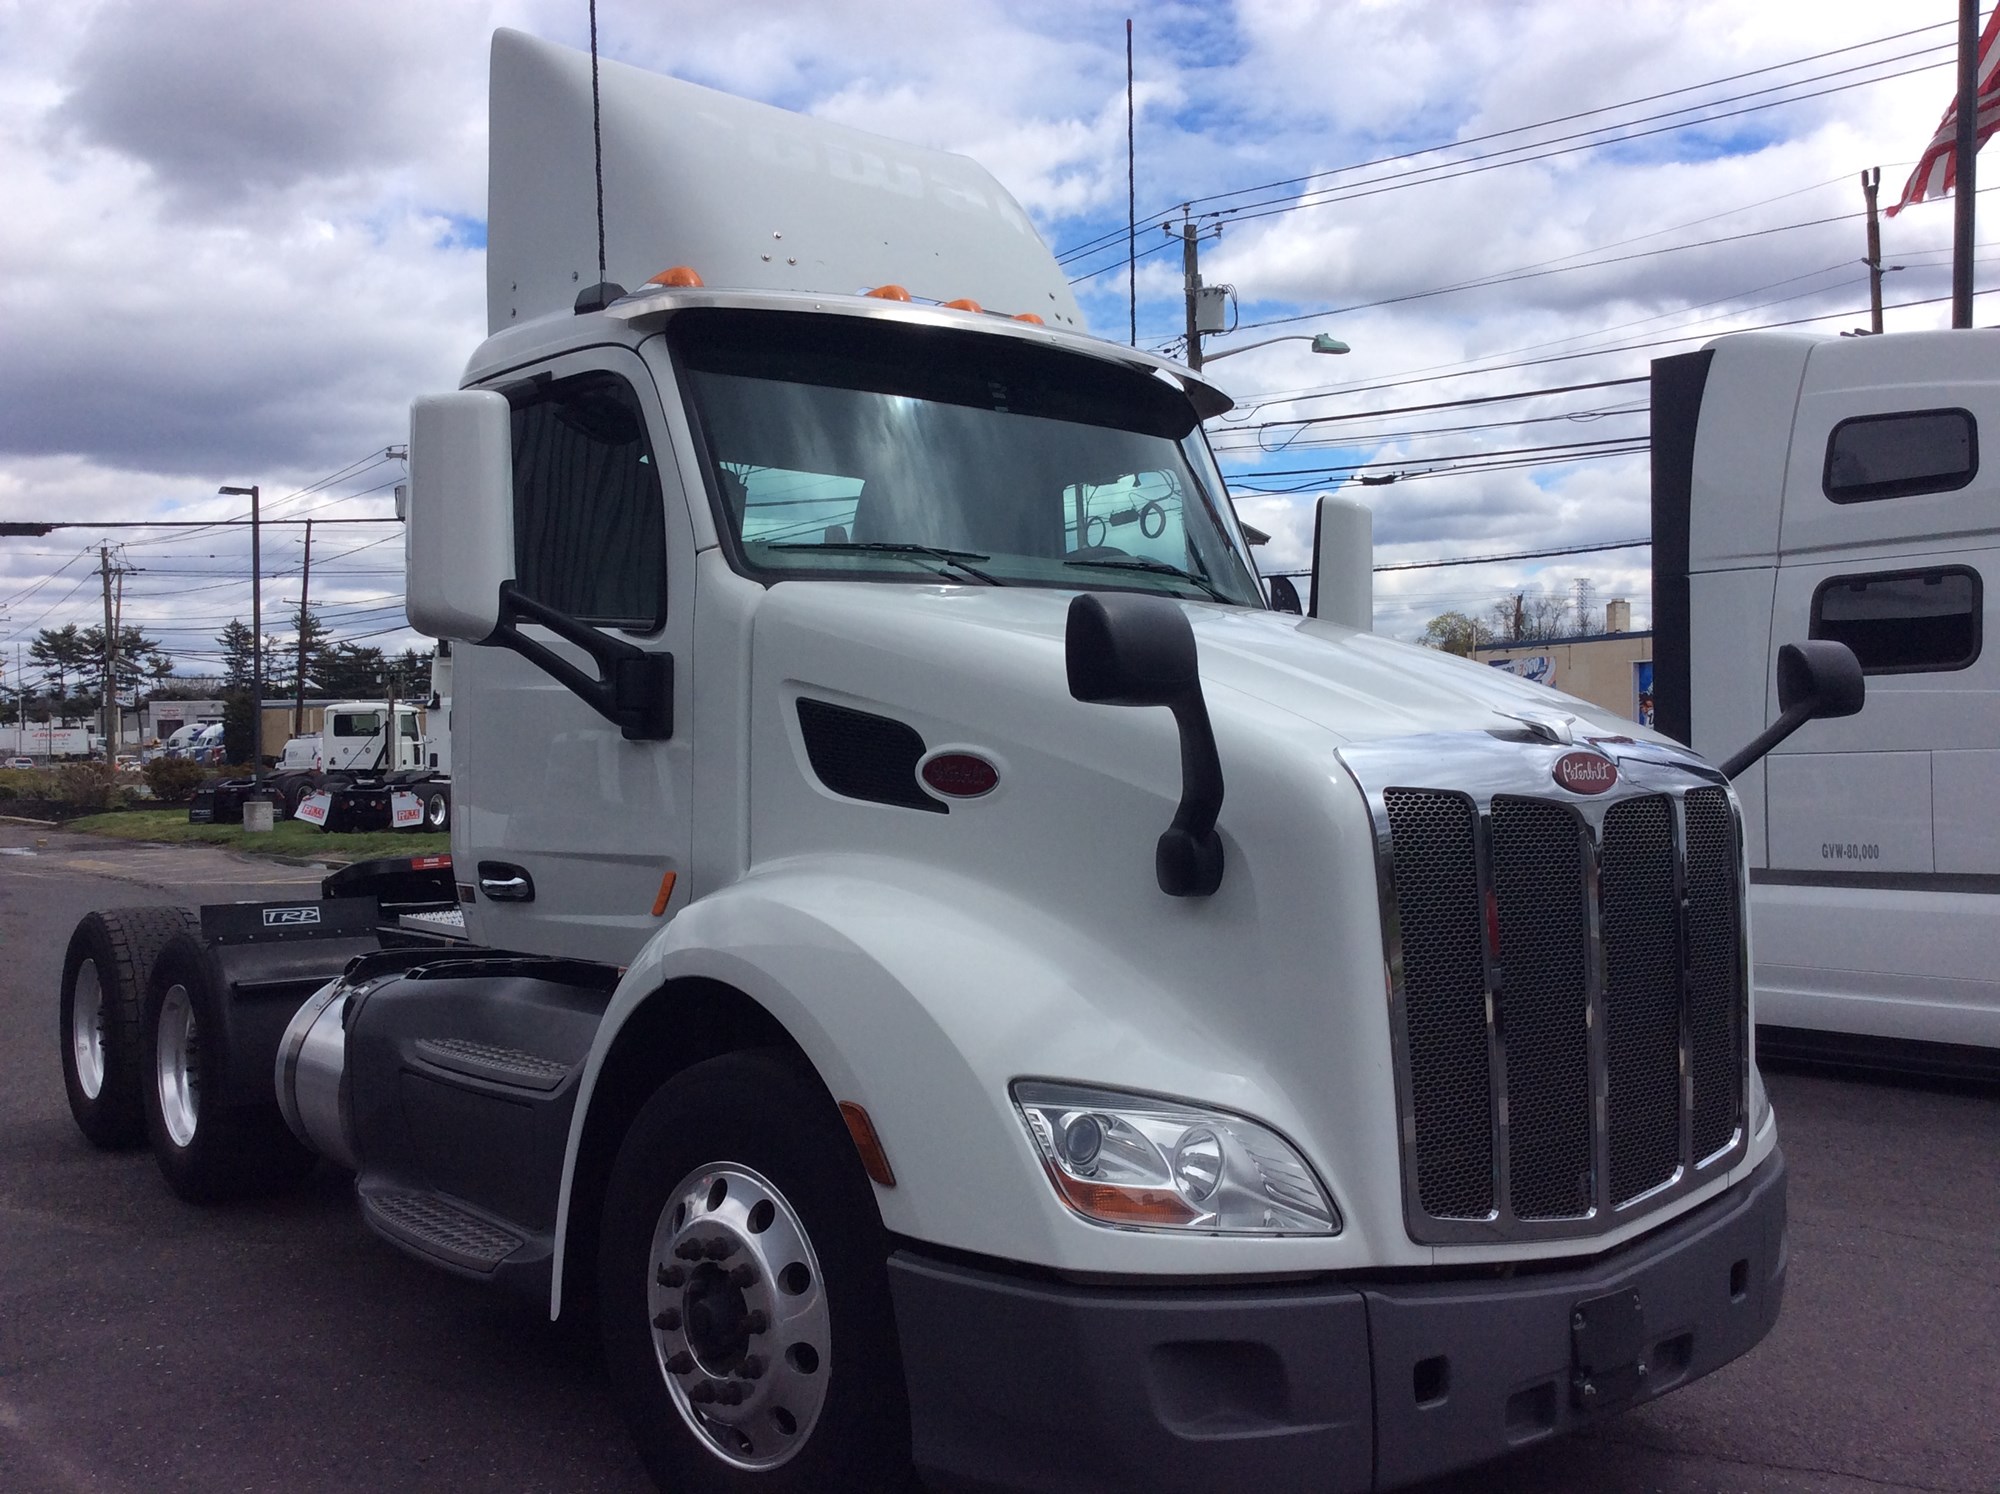 Used Truck Inventory - 1000350 02 - 78